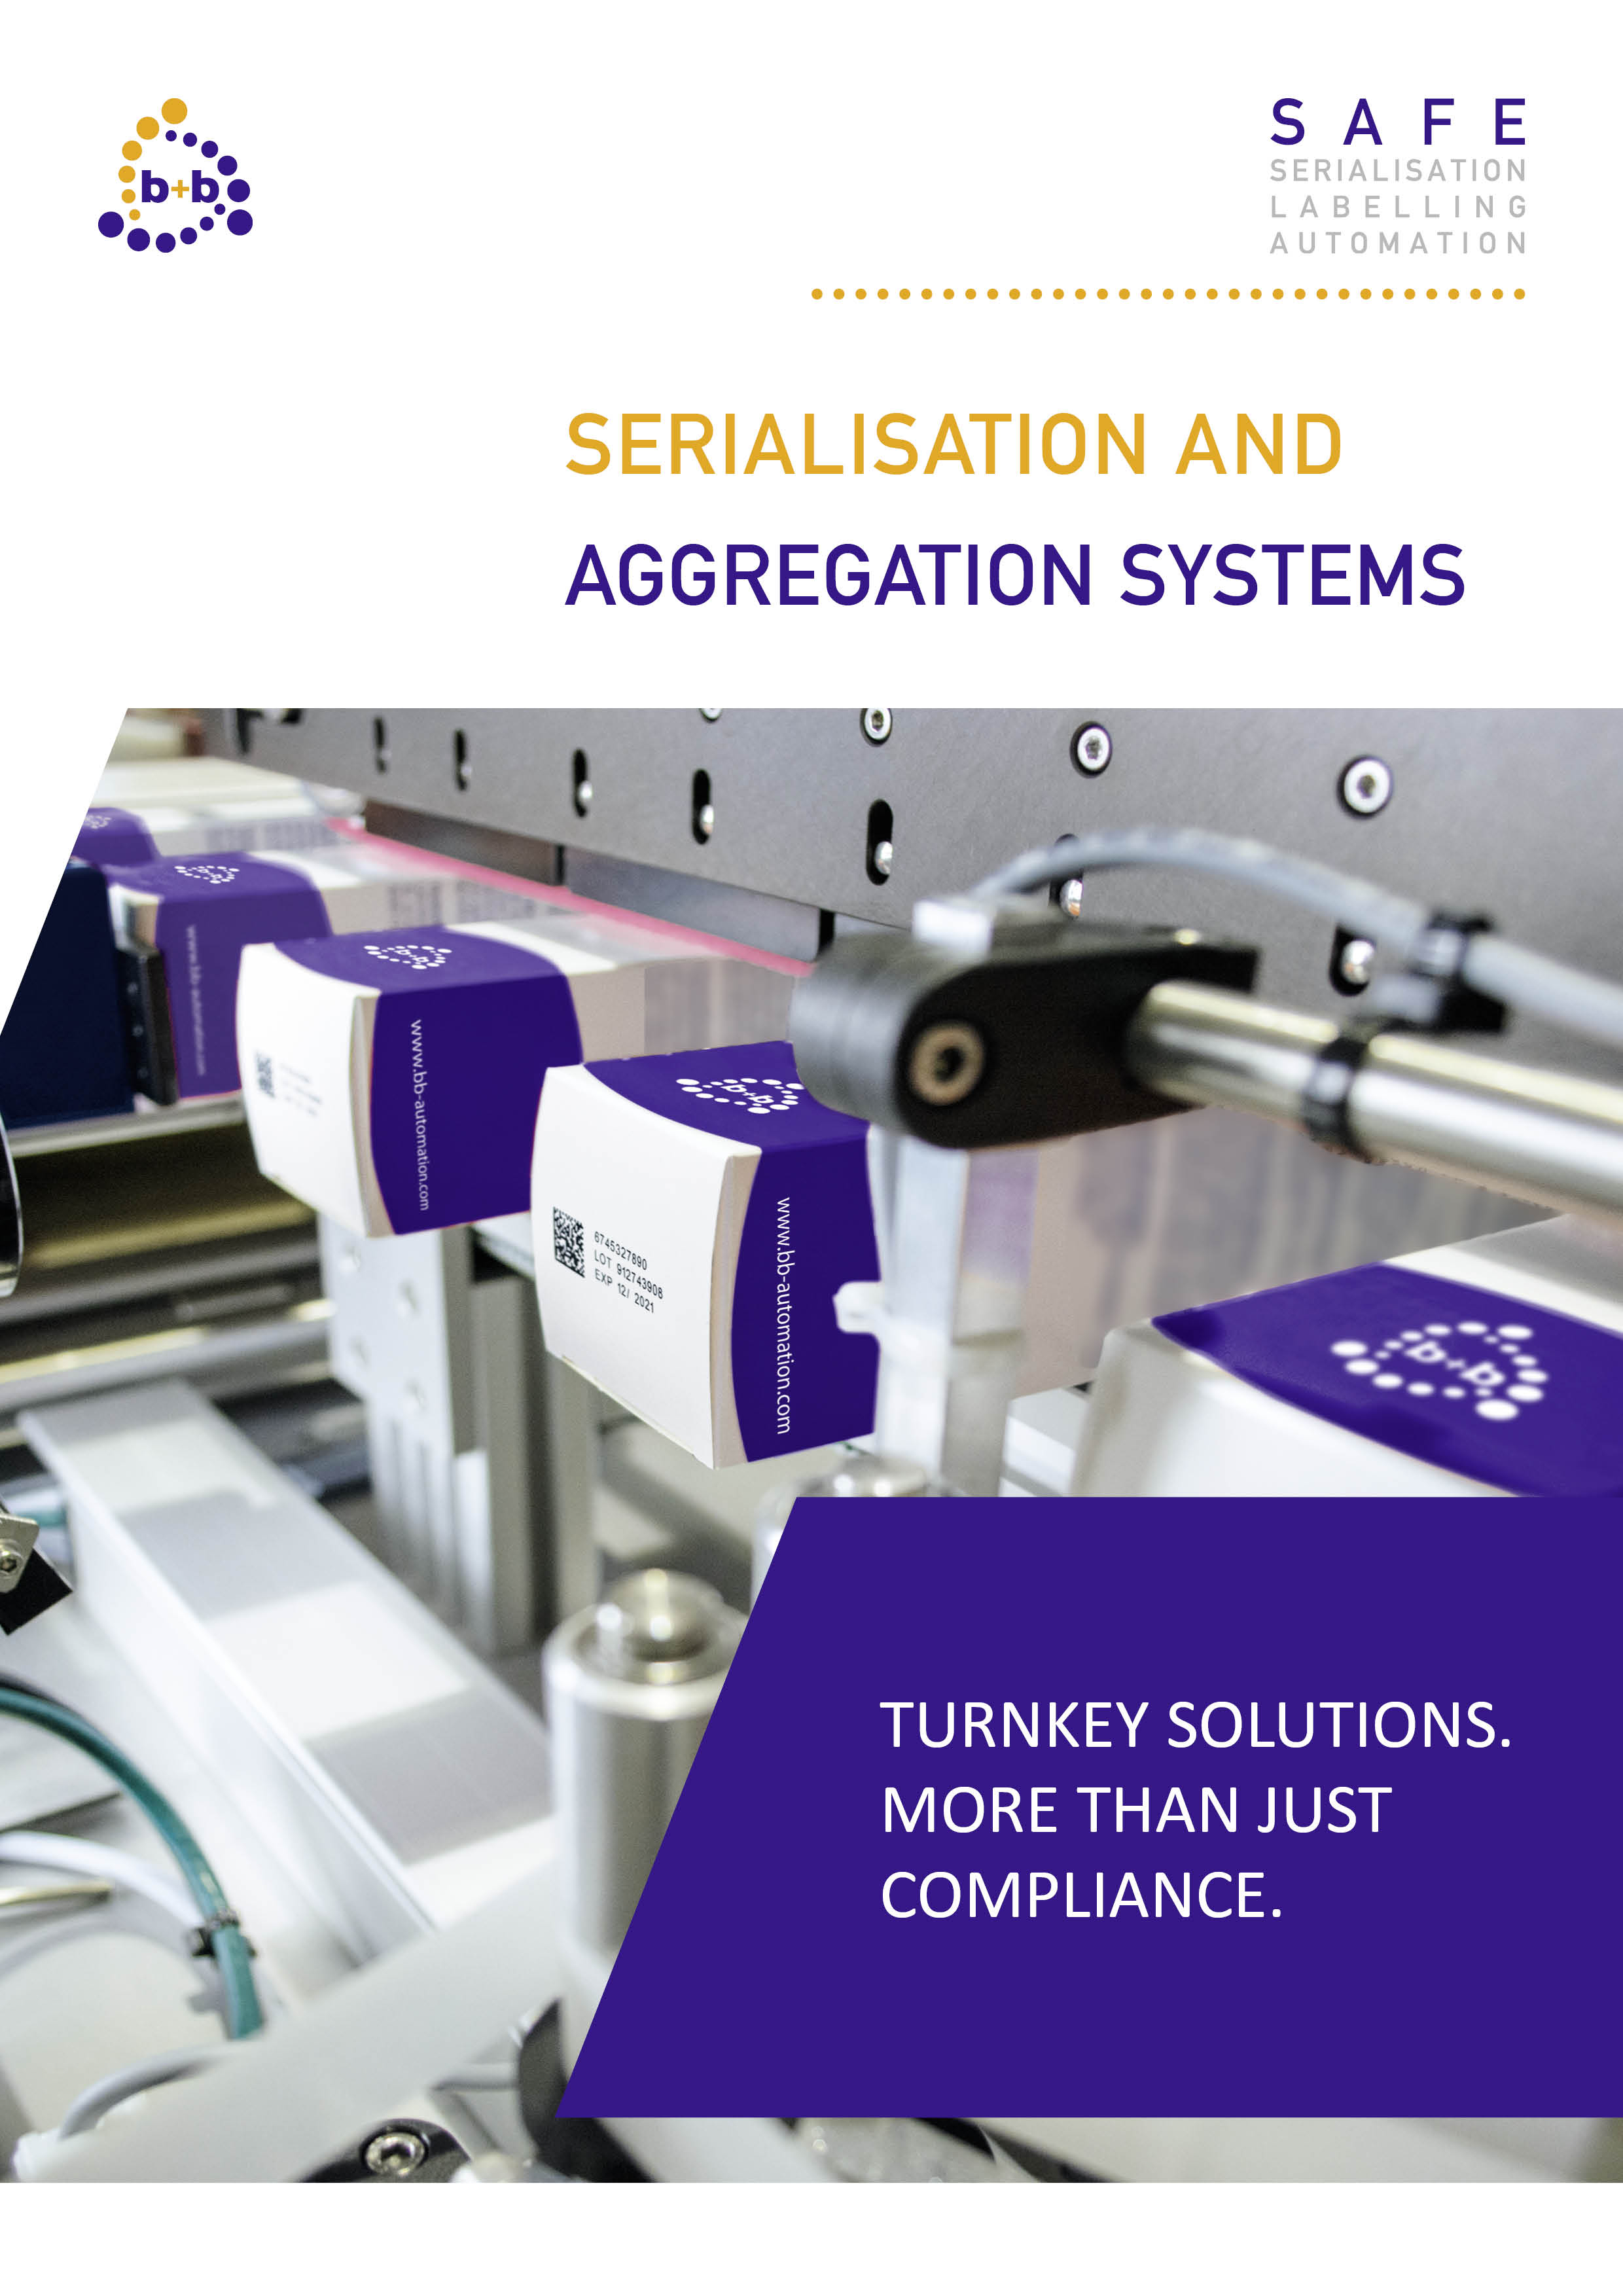 Serialisation and aggregation